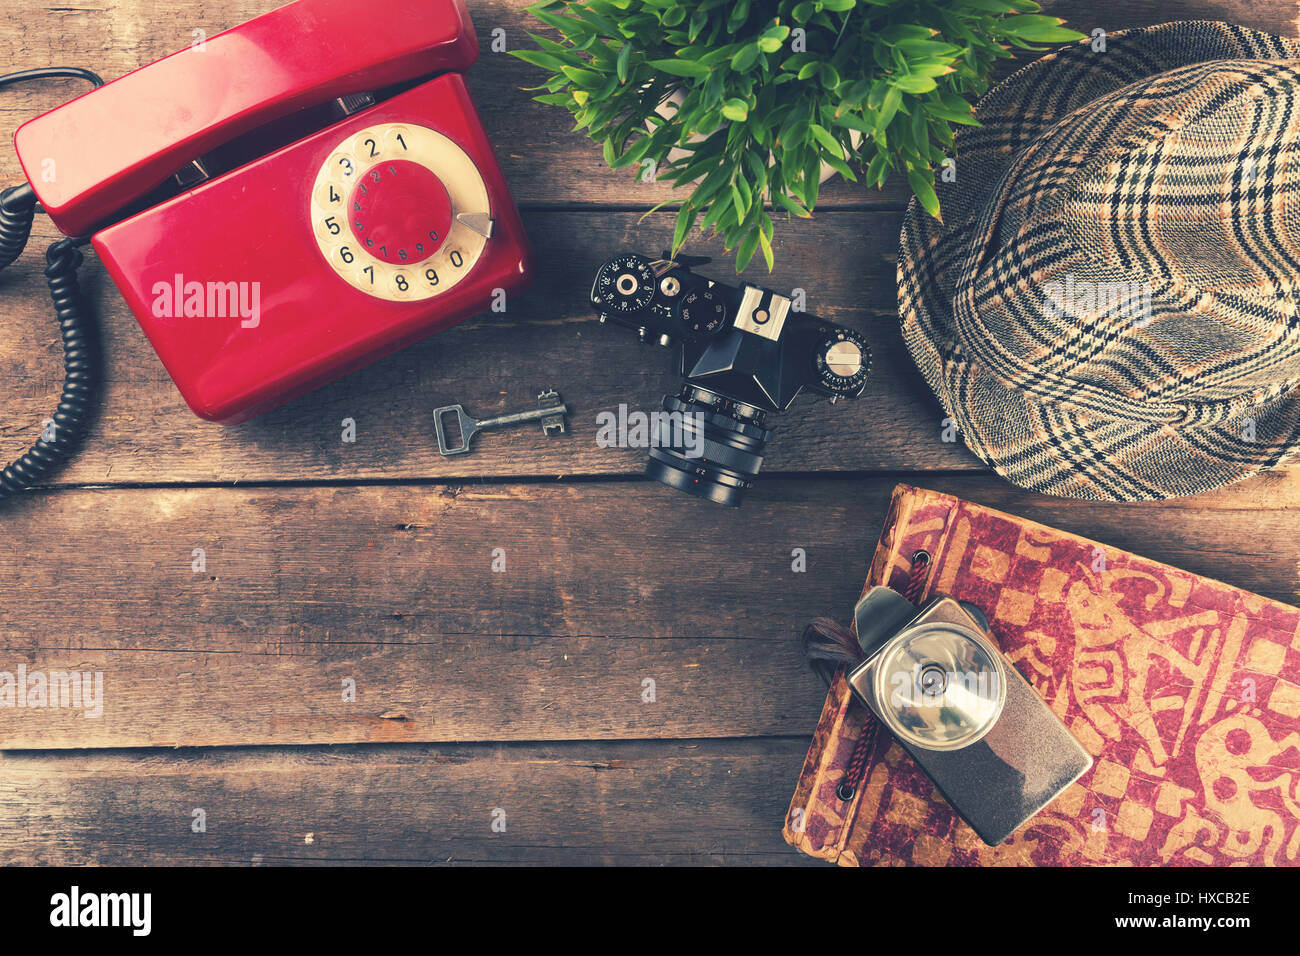 vintage items and accessories on old wooden table Stock Photo